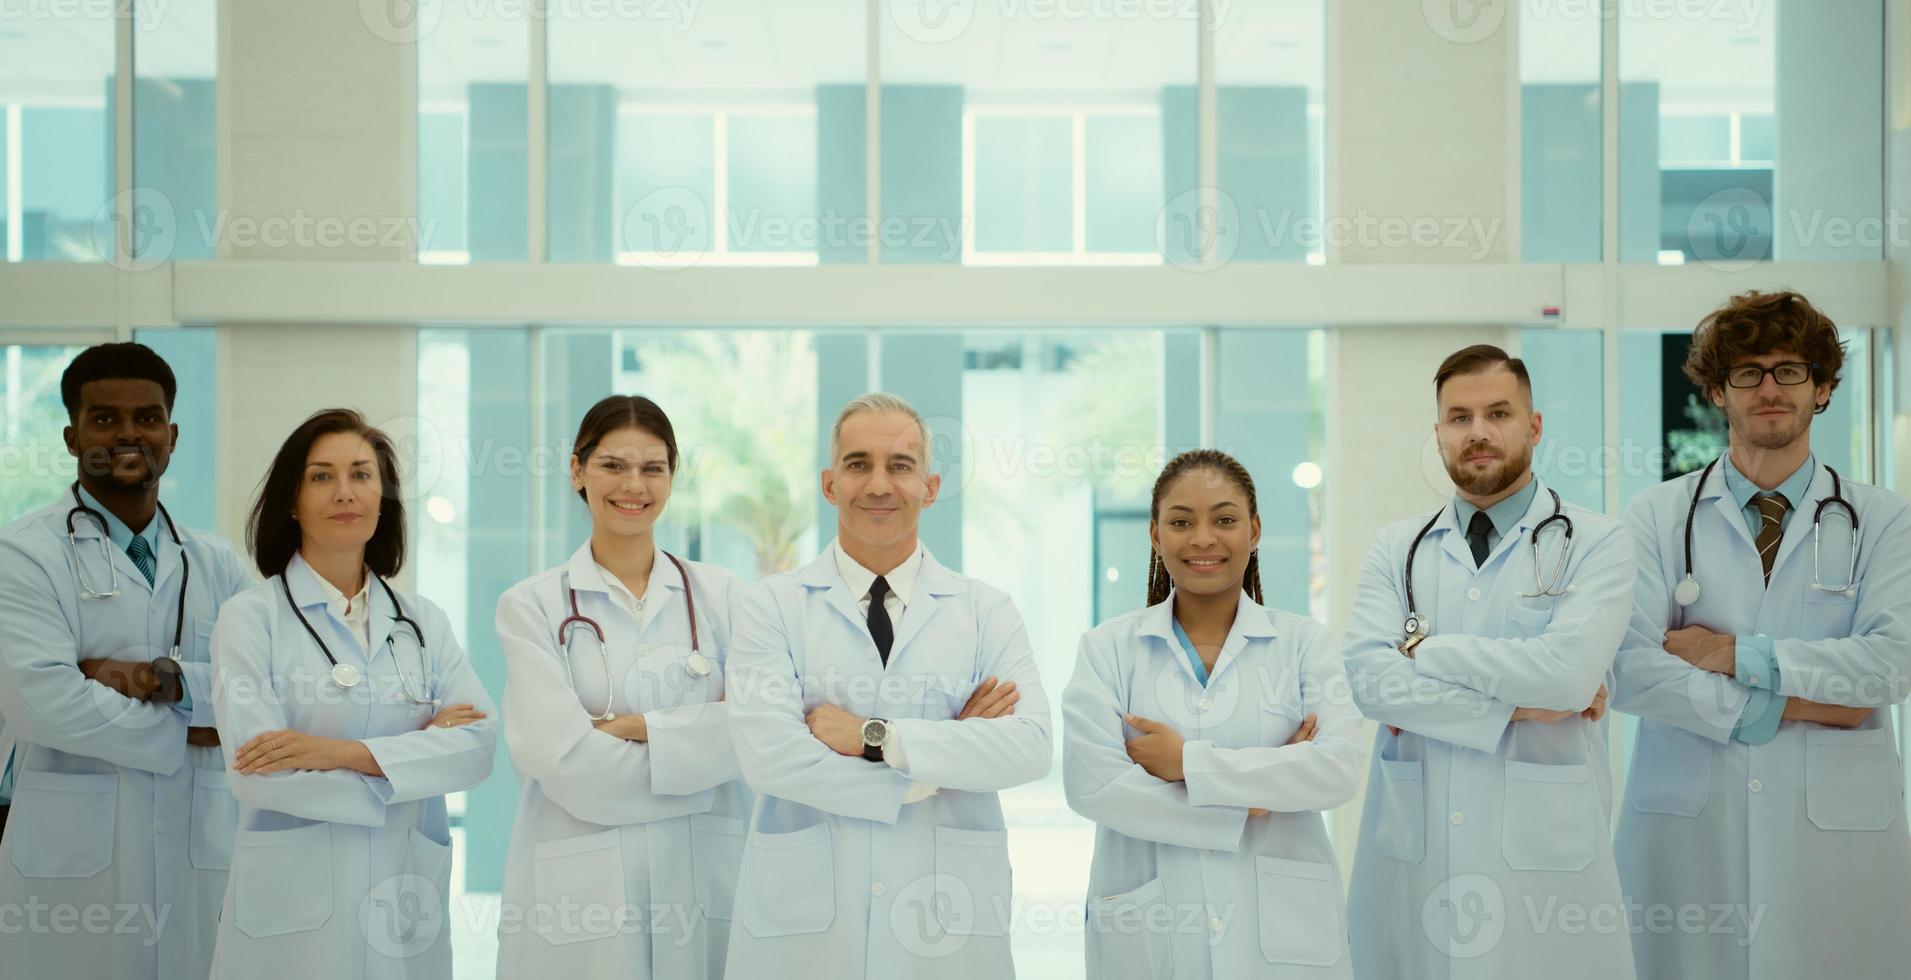 Portrait of Doctors and medical students with various gestures to prepare for patient care photo